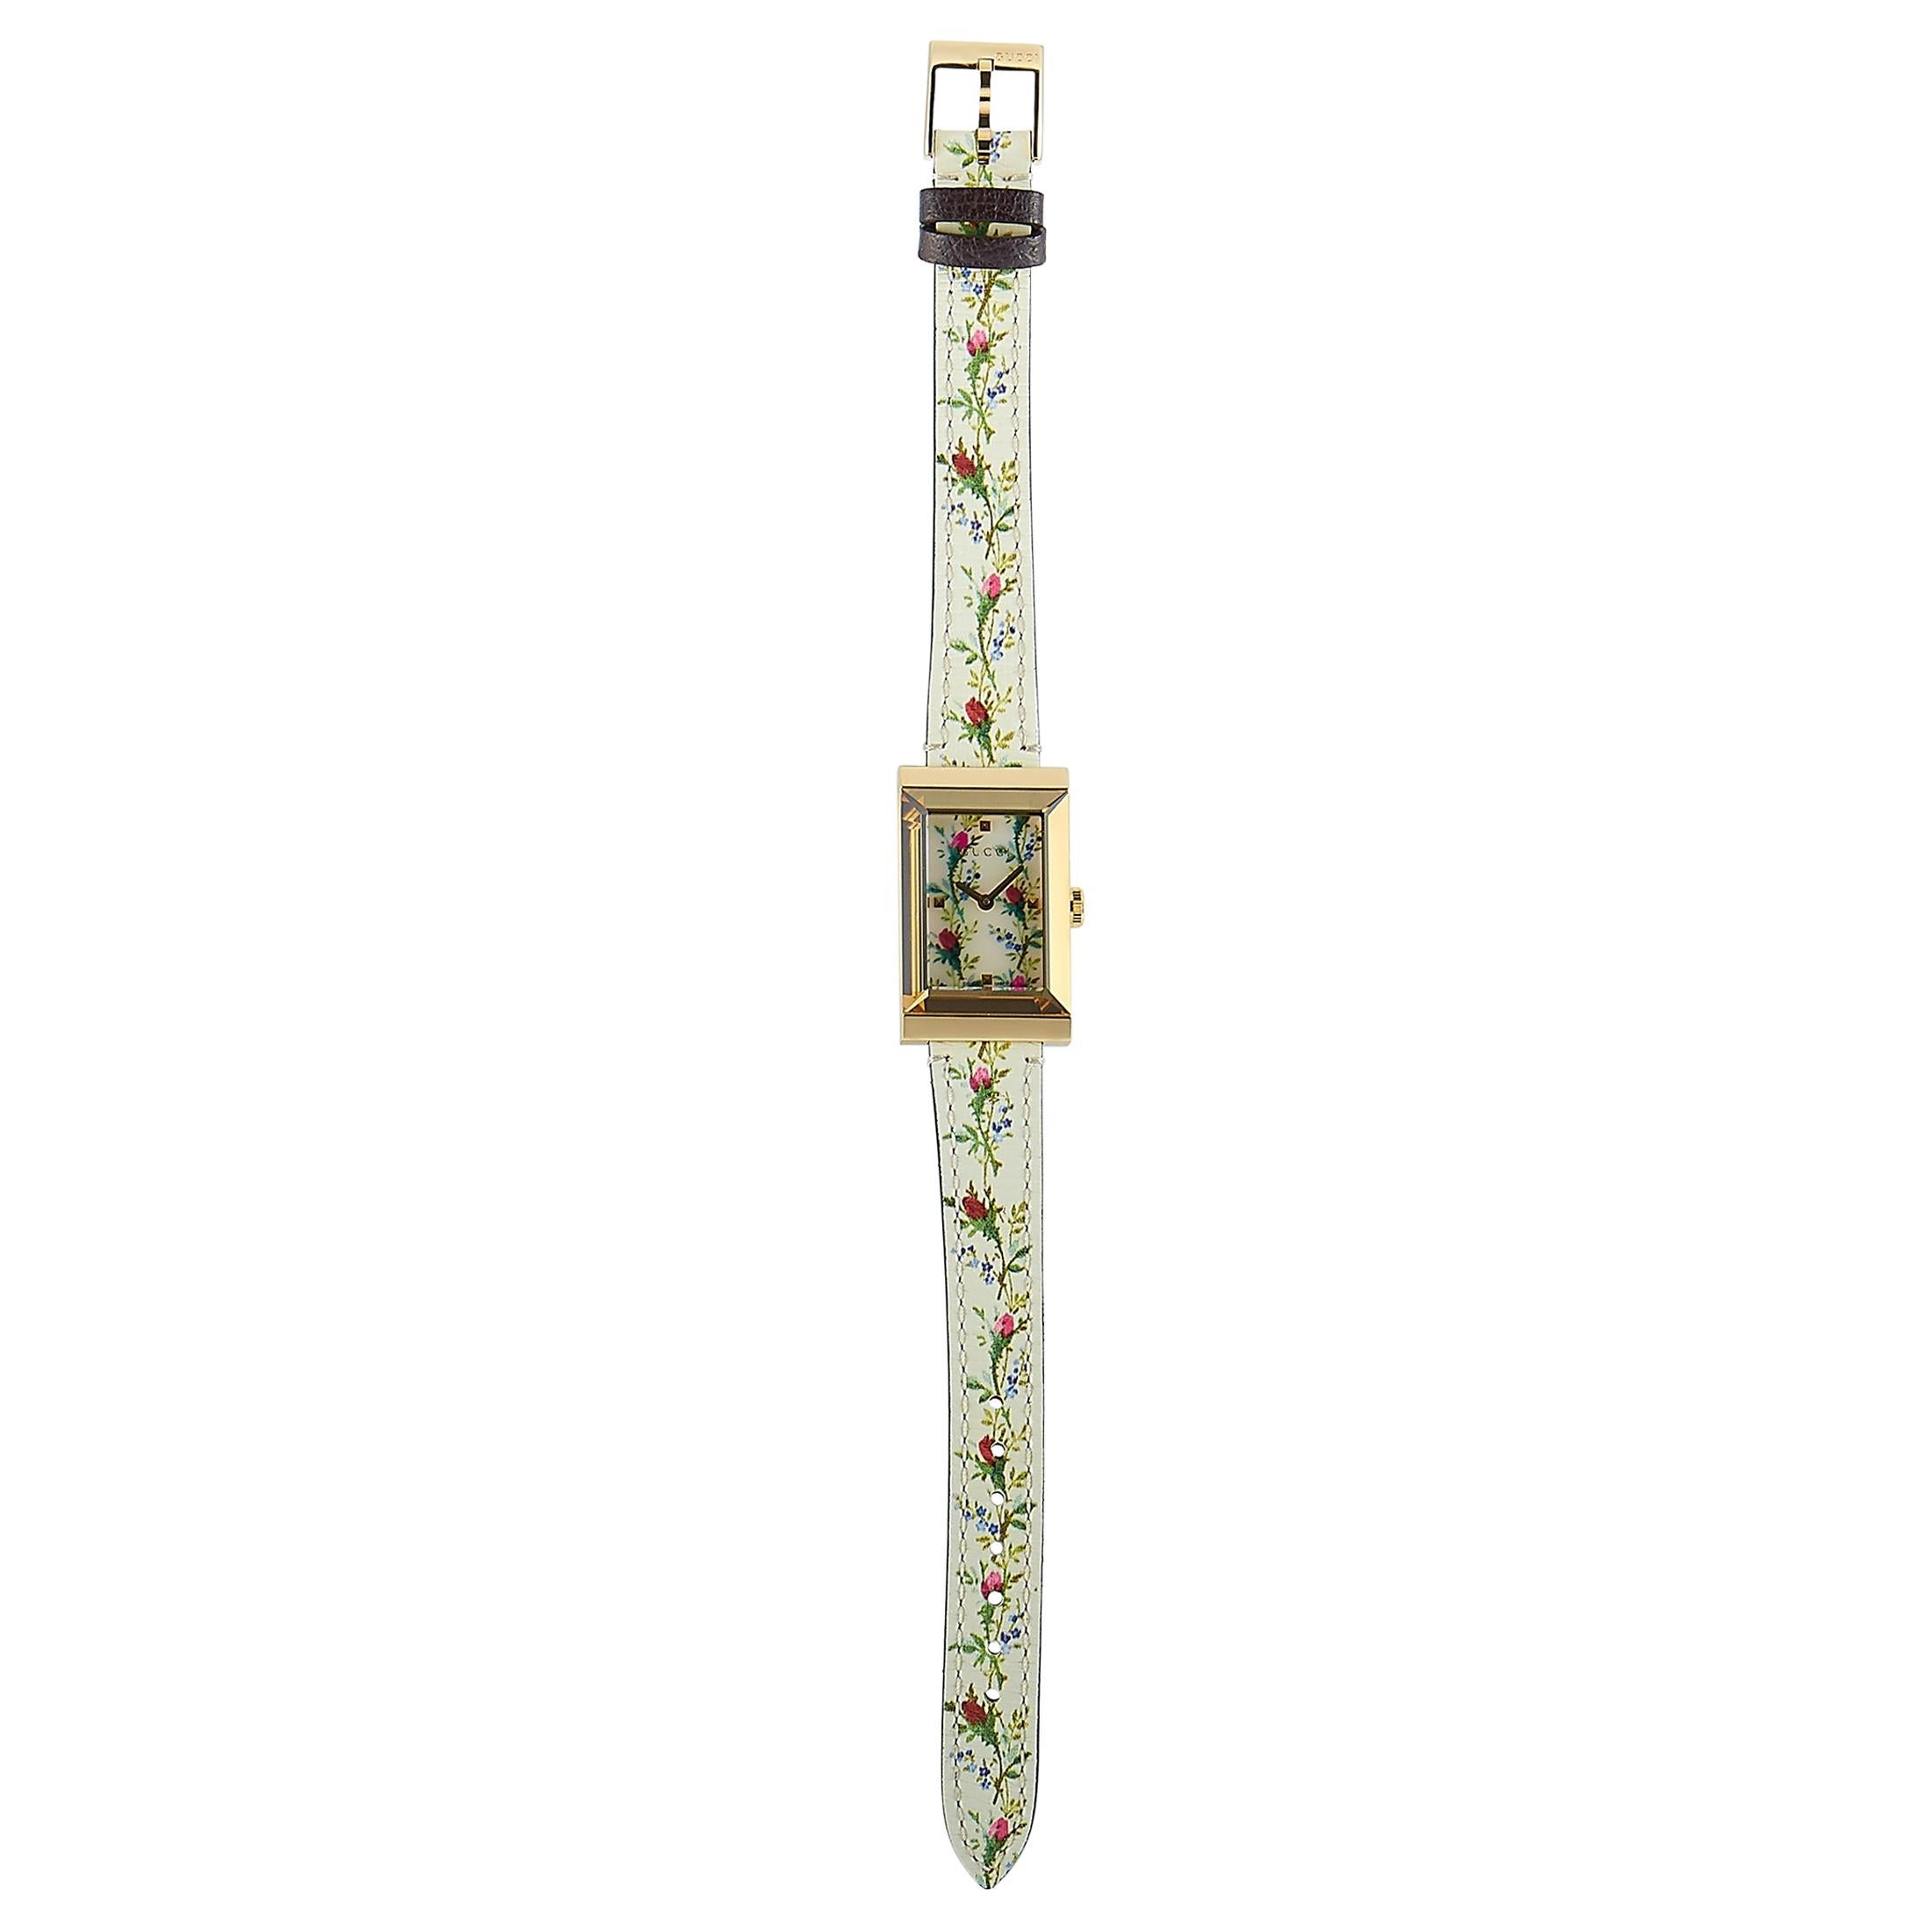 The Gucci G-Frame watch, reference number YA147407, is presented with a yellow gold PVD-plated stainless steel case that is water-resistant to 30 meters. The case is mounted onto a leather strap with floral motifs, secured on the wrist with a tang